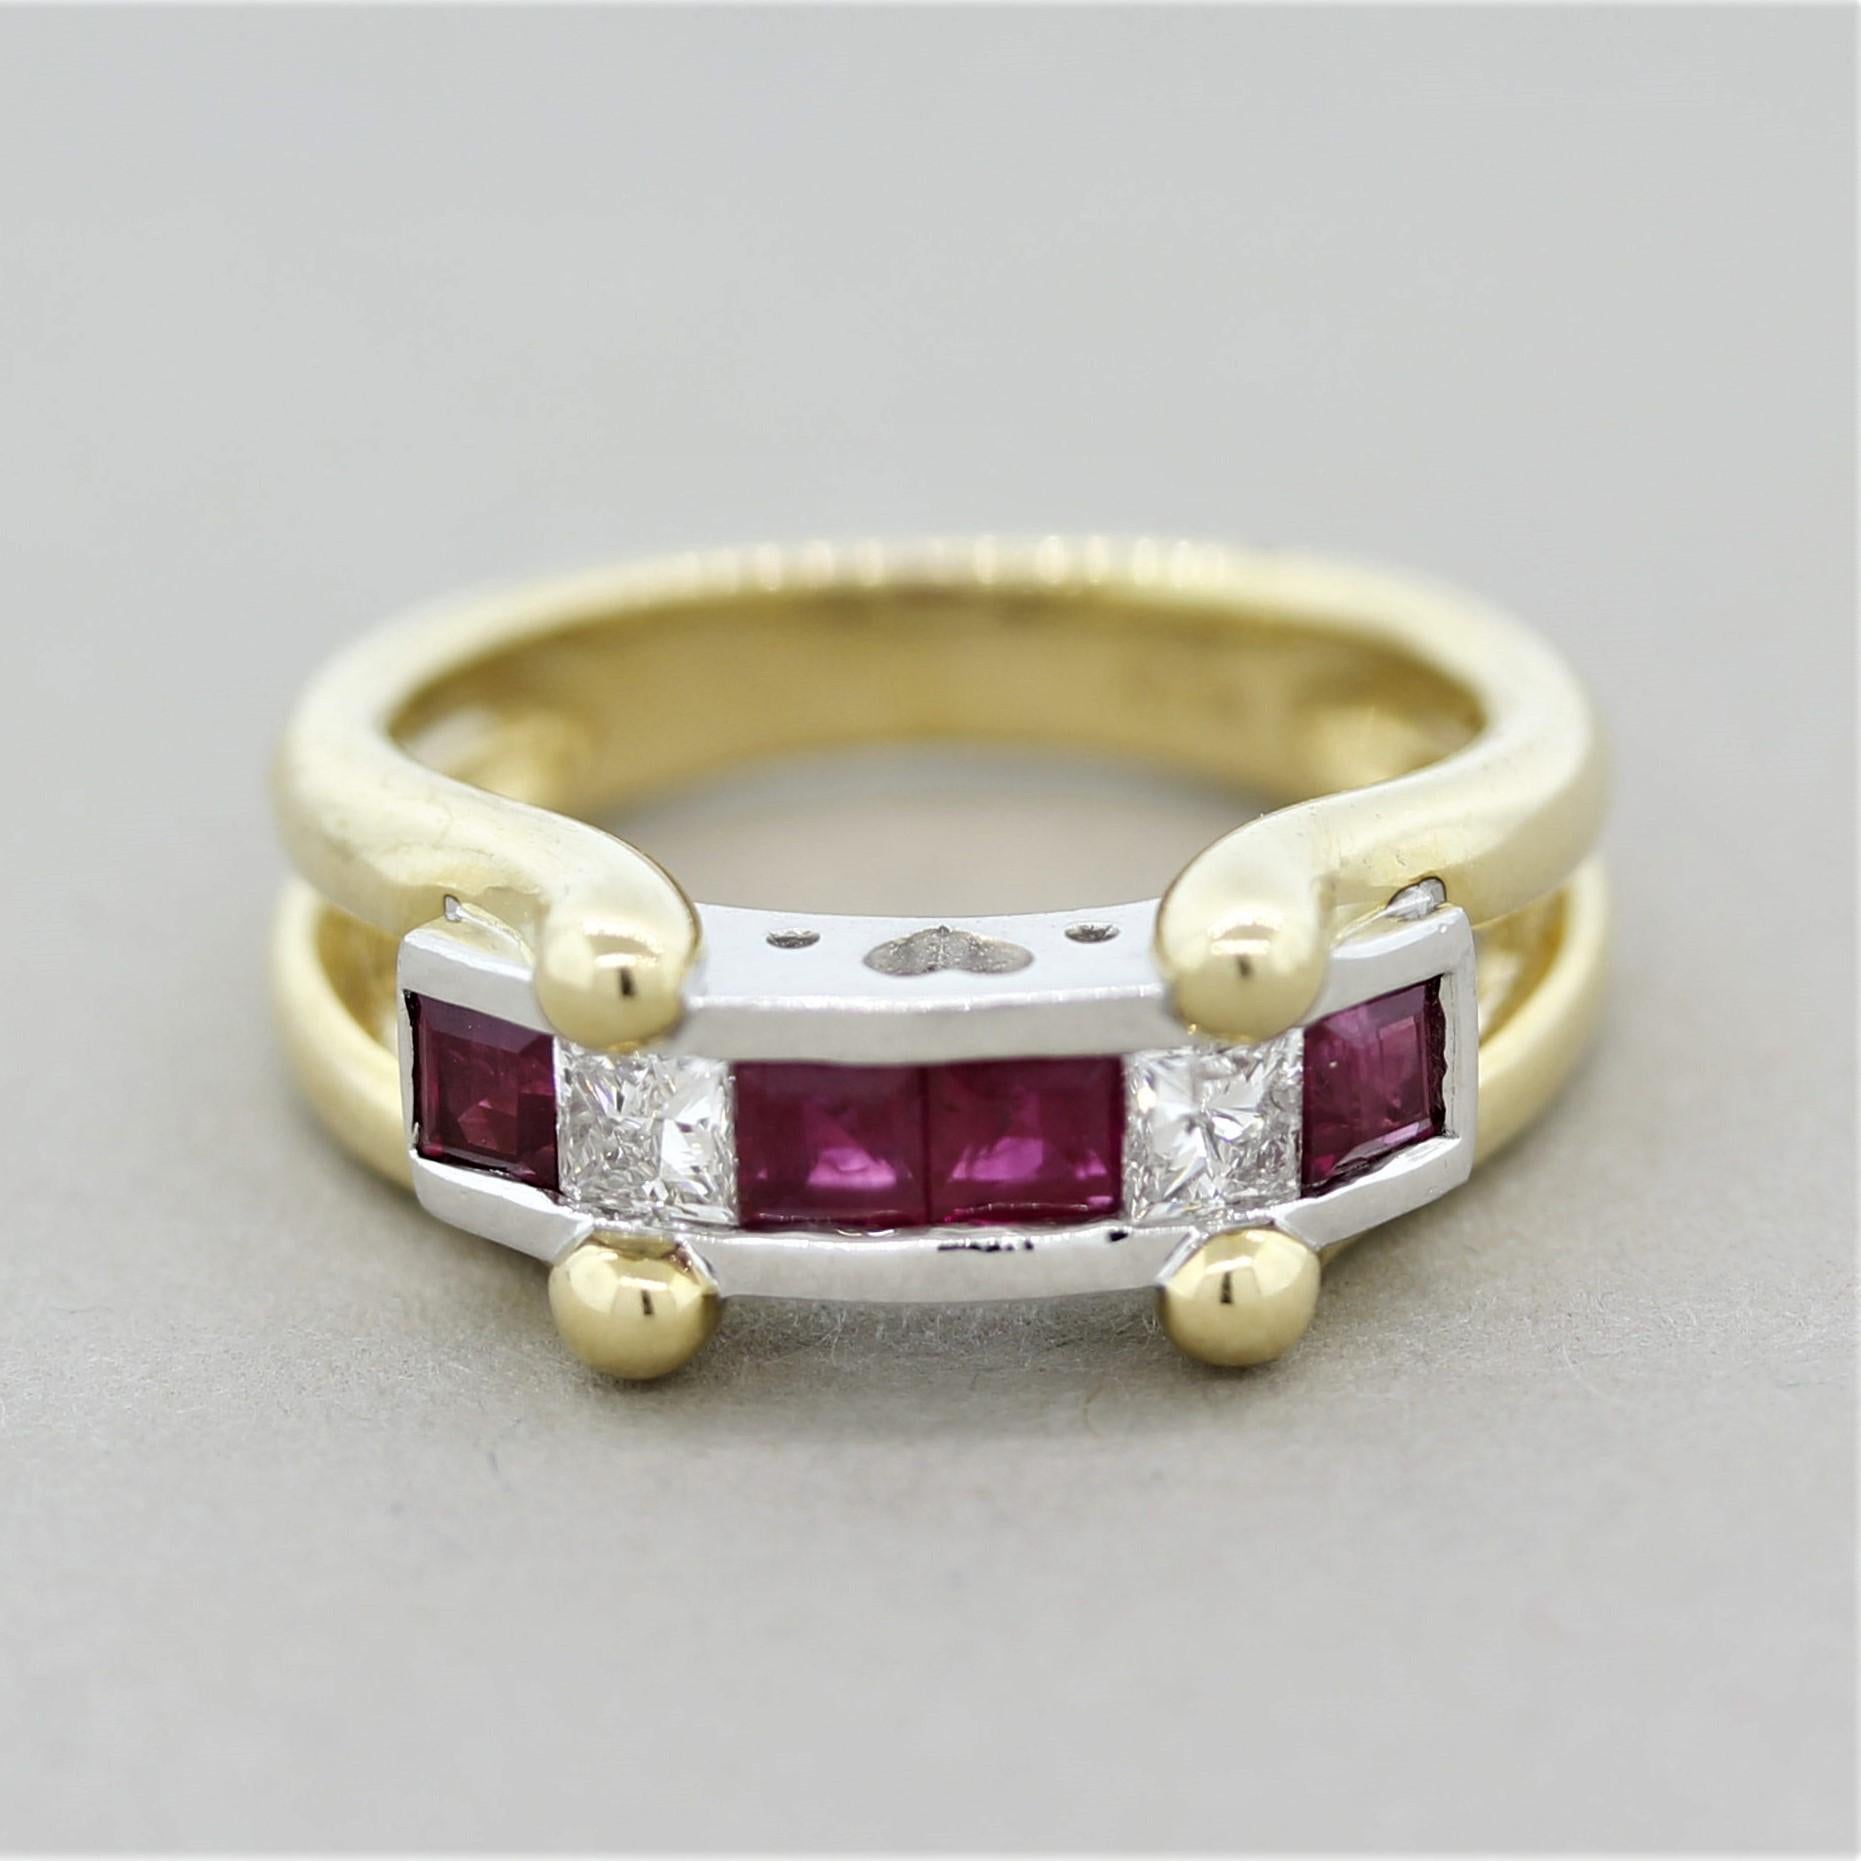 A sweet and stylish ring featuring 0.94 carats of square shaped rubies with a bright vivid red color. They are accented by 2 princess-cut diamonds weighing 0.35 carats. The ring is made in both 18k yellow gold and platinum; and has 2 hearts on the